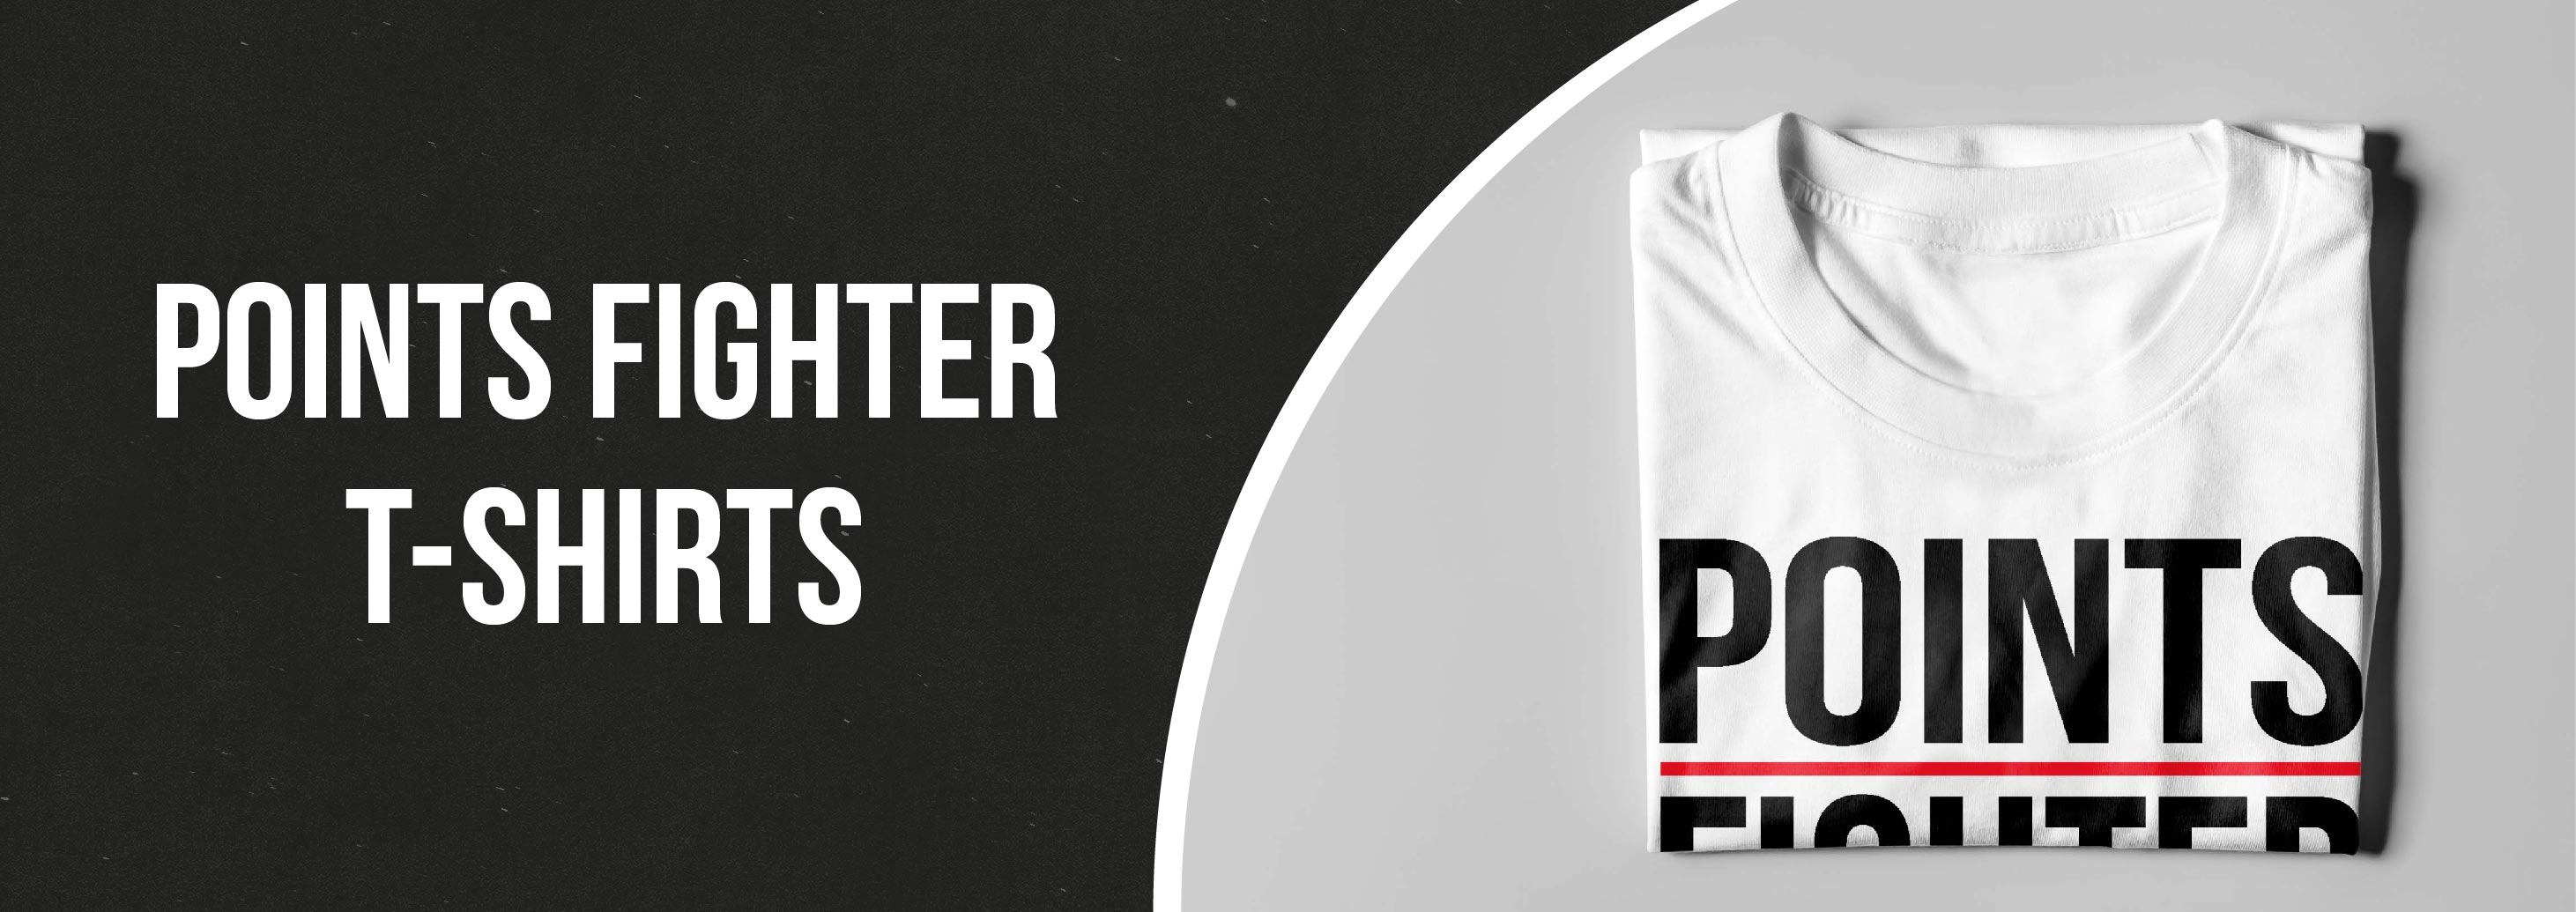 Points Fighter T-Shirts